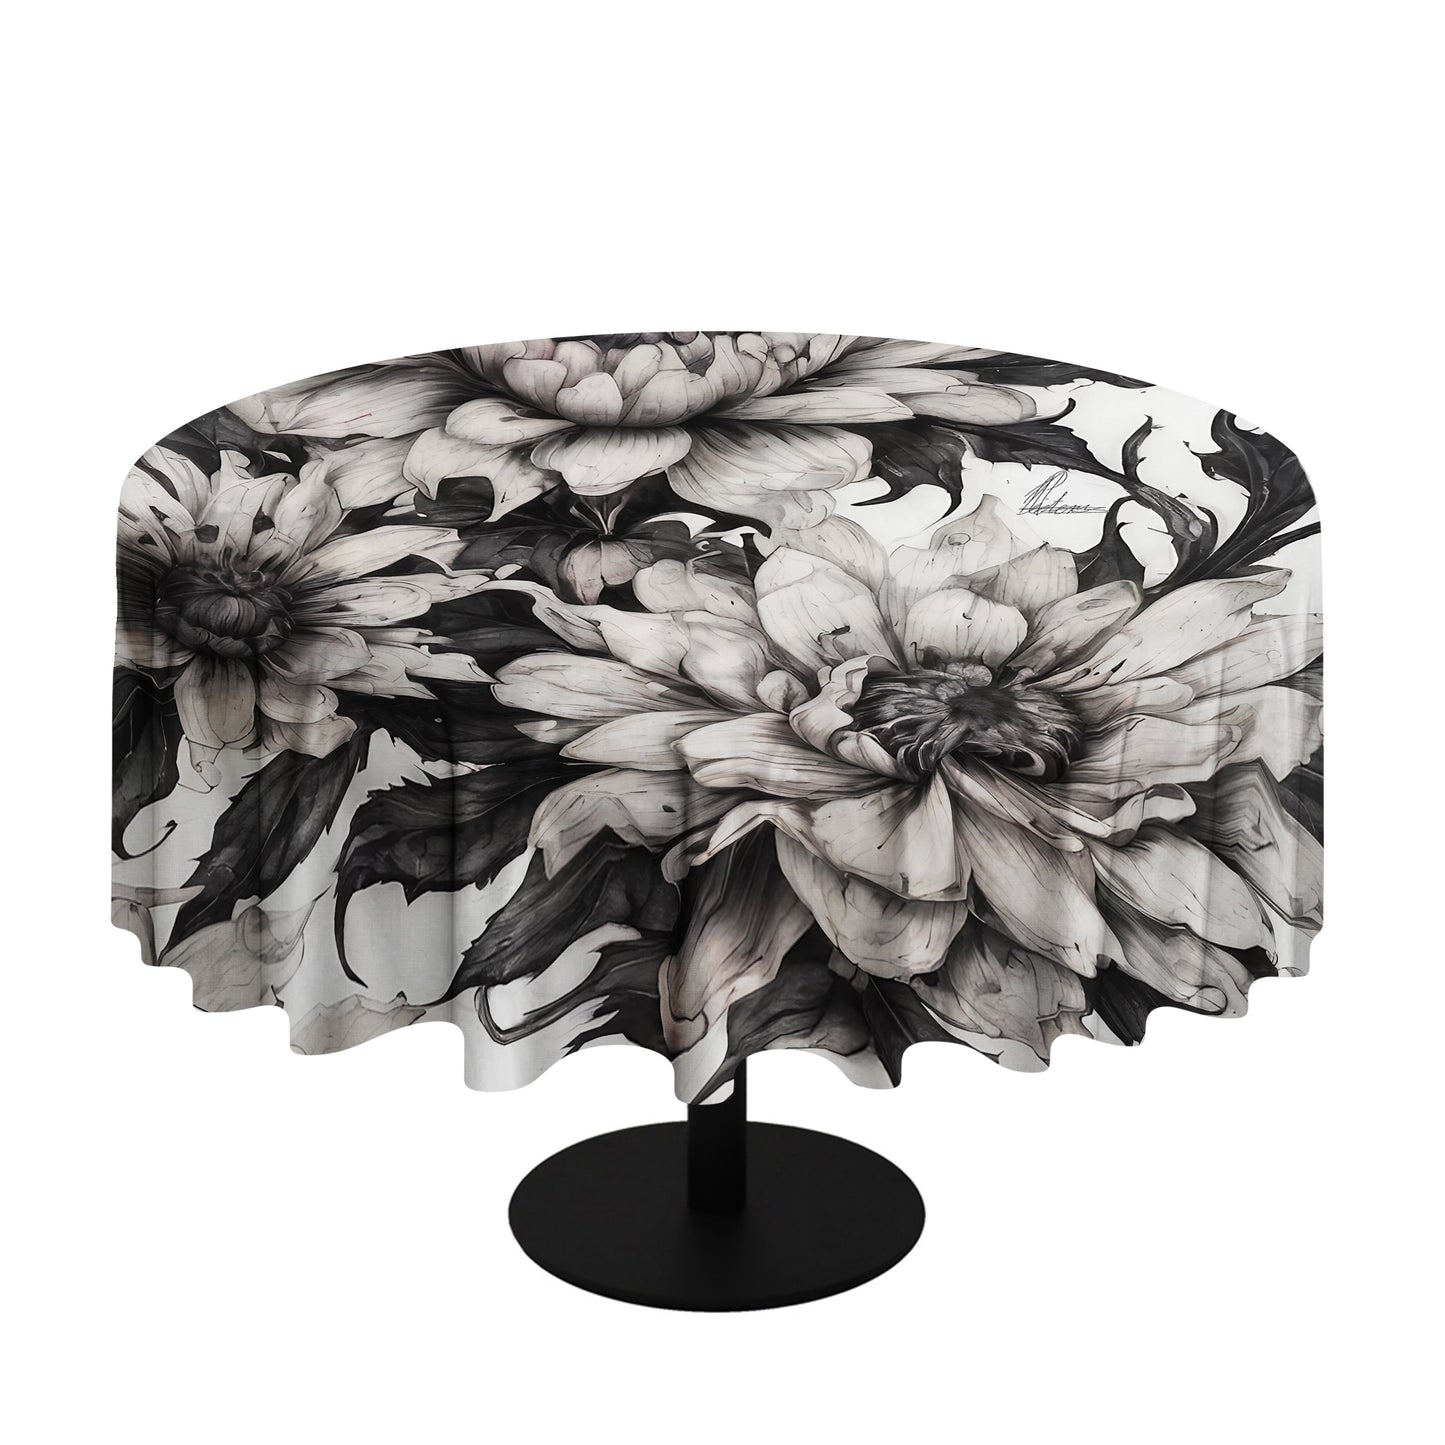 Midnight Garden Flowers Round Tablecloth By Nathan Pieterse